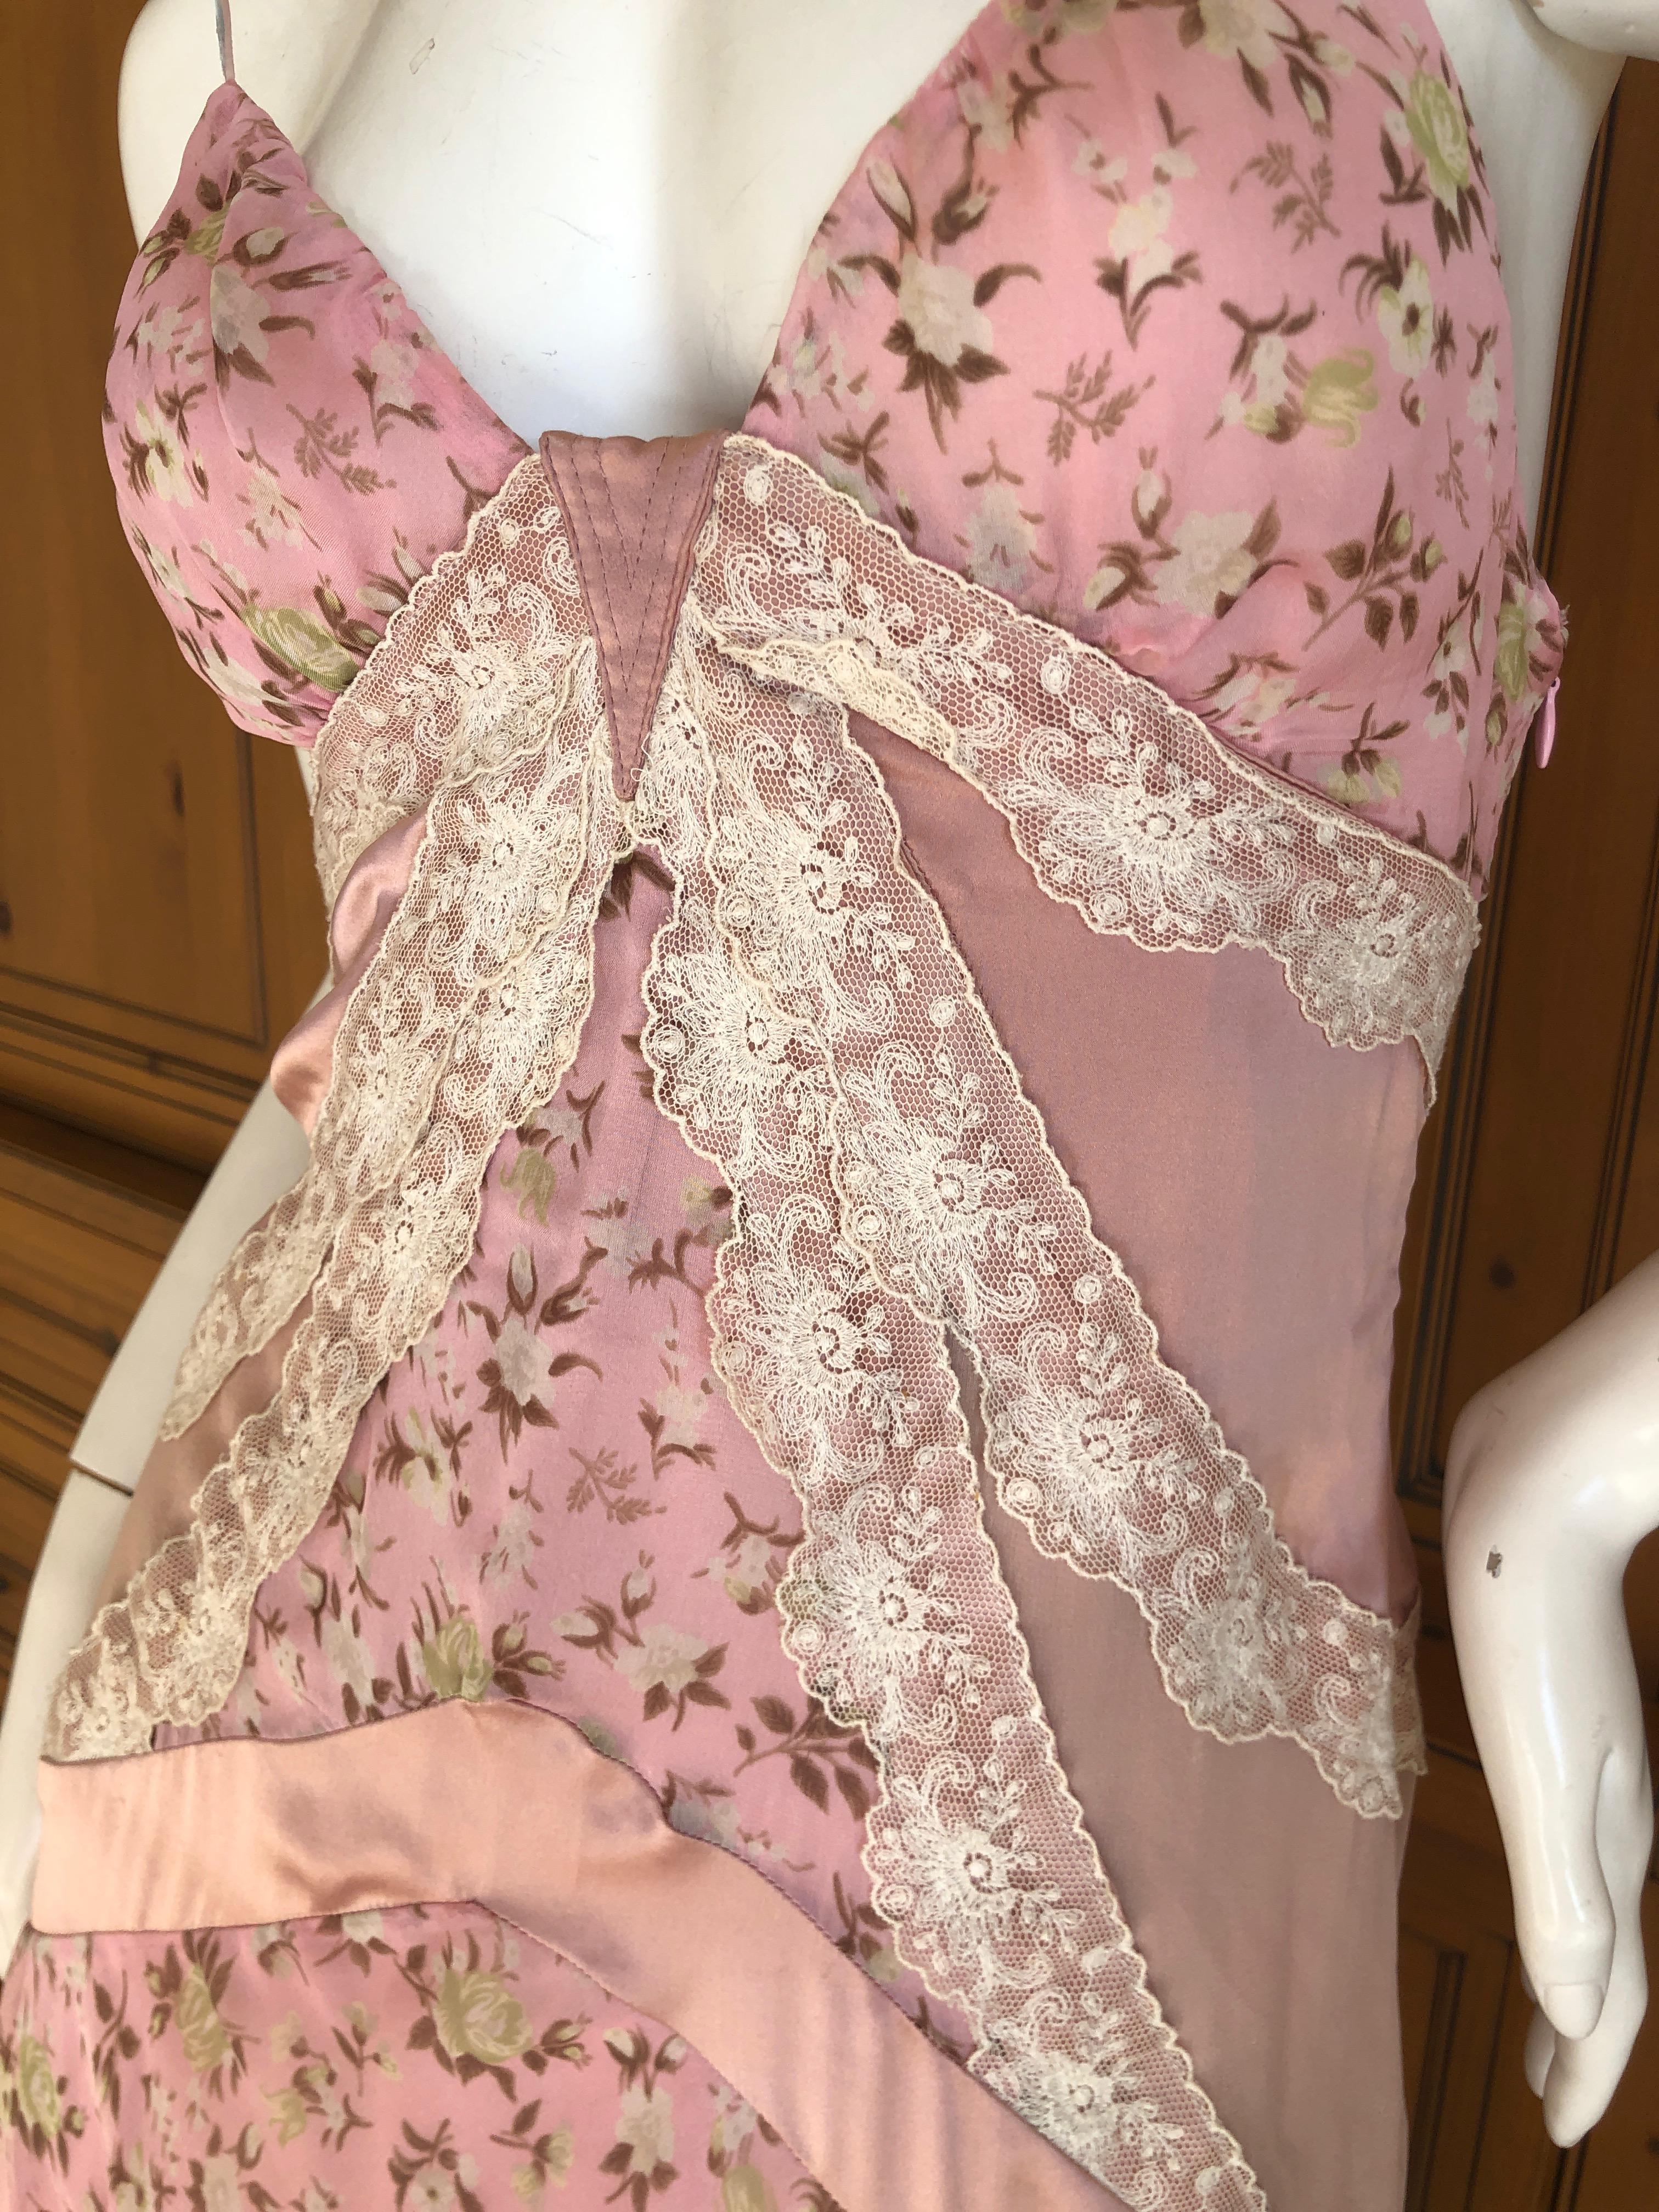 D&G Dolce & Gabbana Romantic Pink Silk Dress with Lace Details In Excellent Condition For Sale In Cloverdale, CA